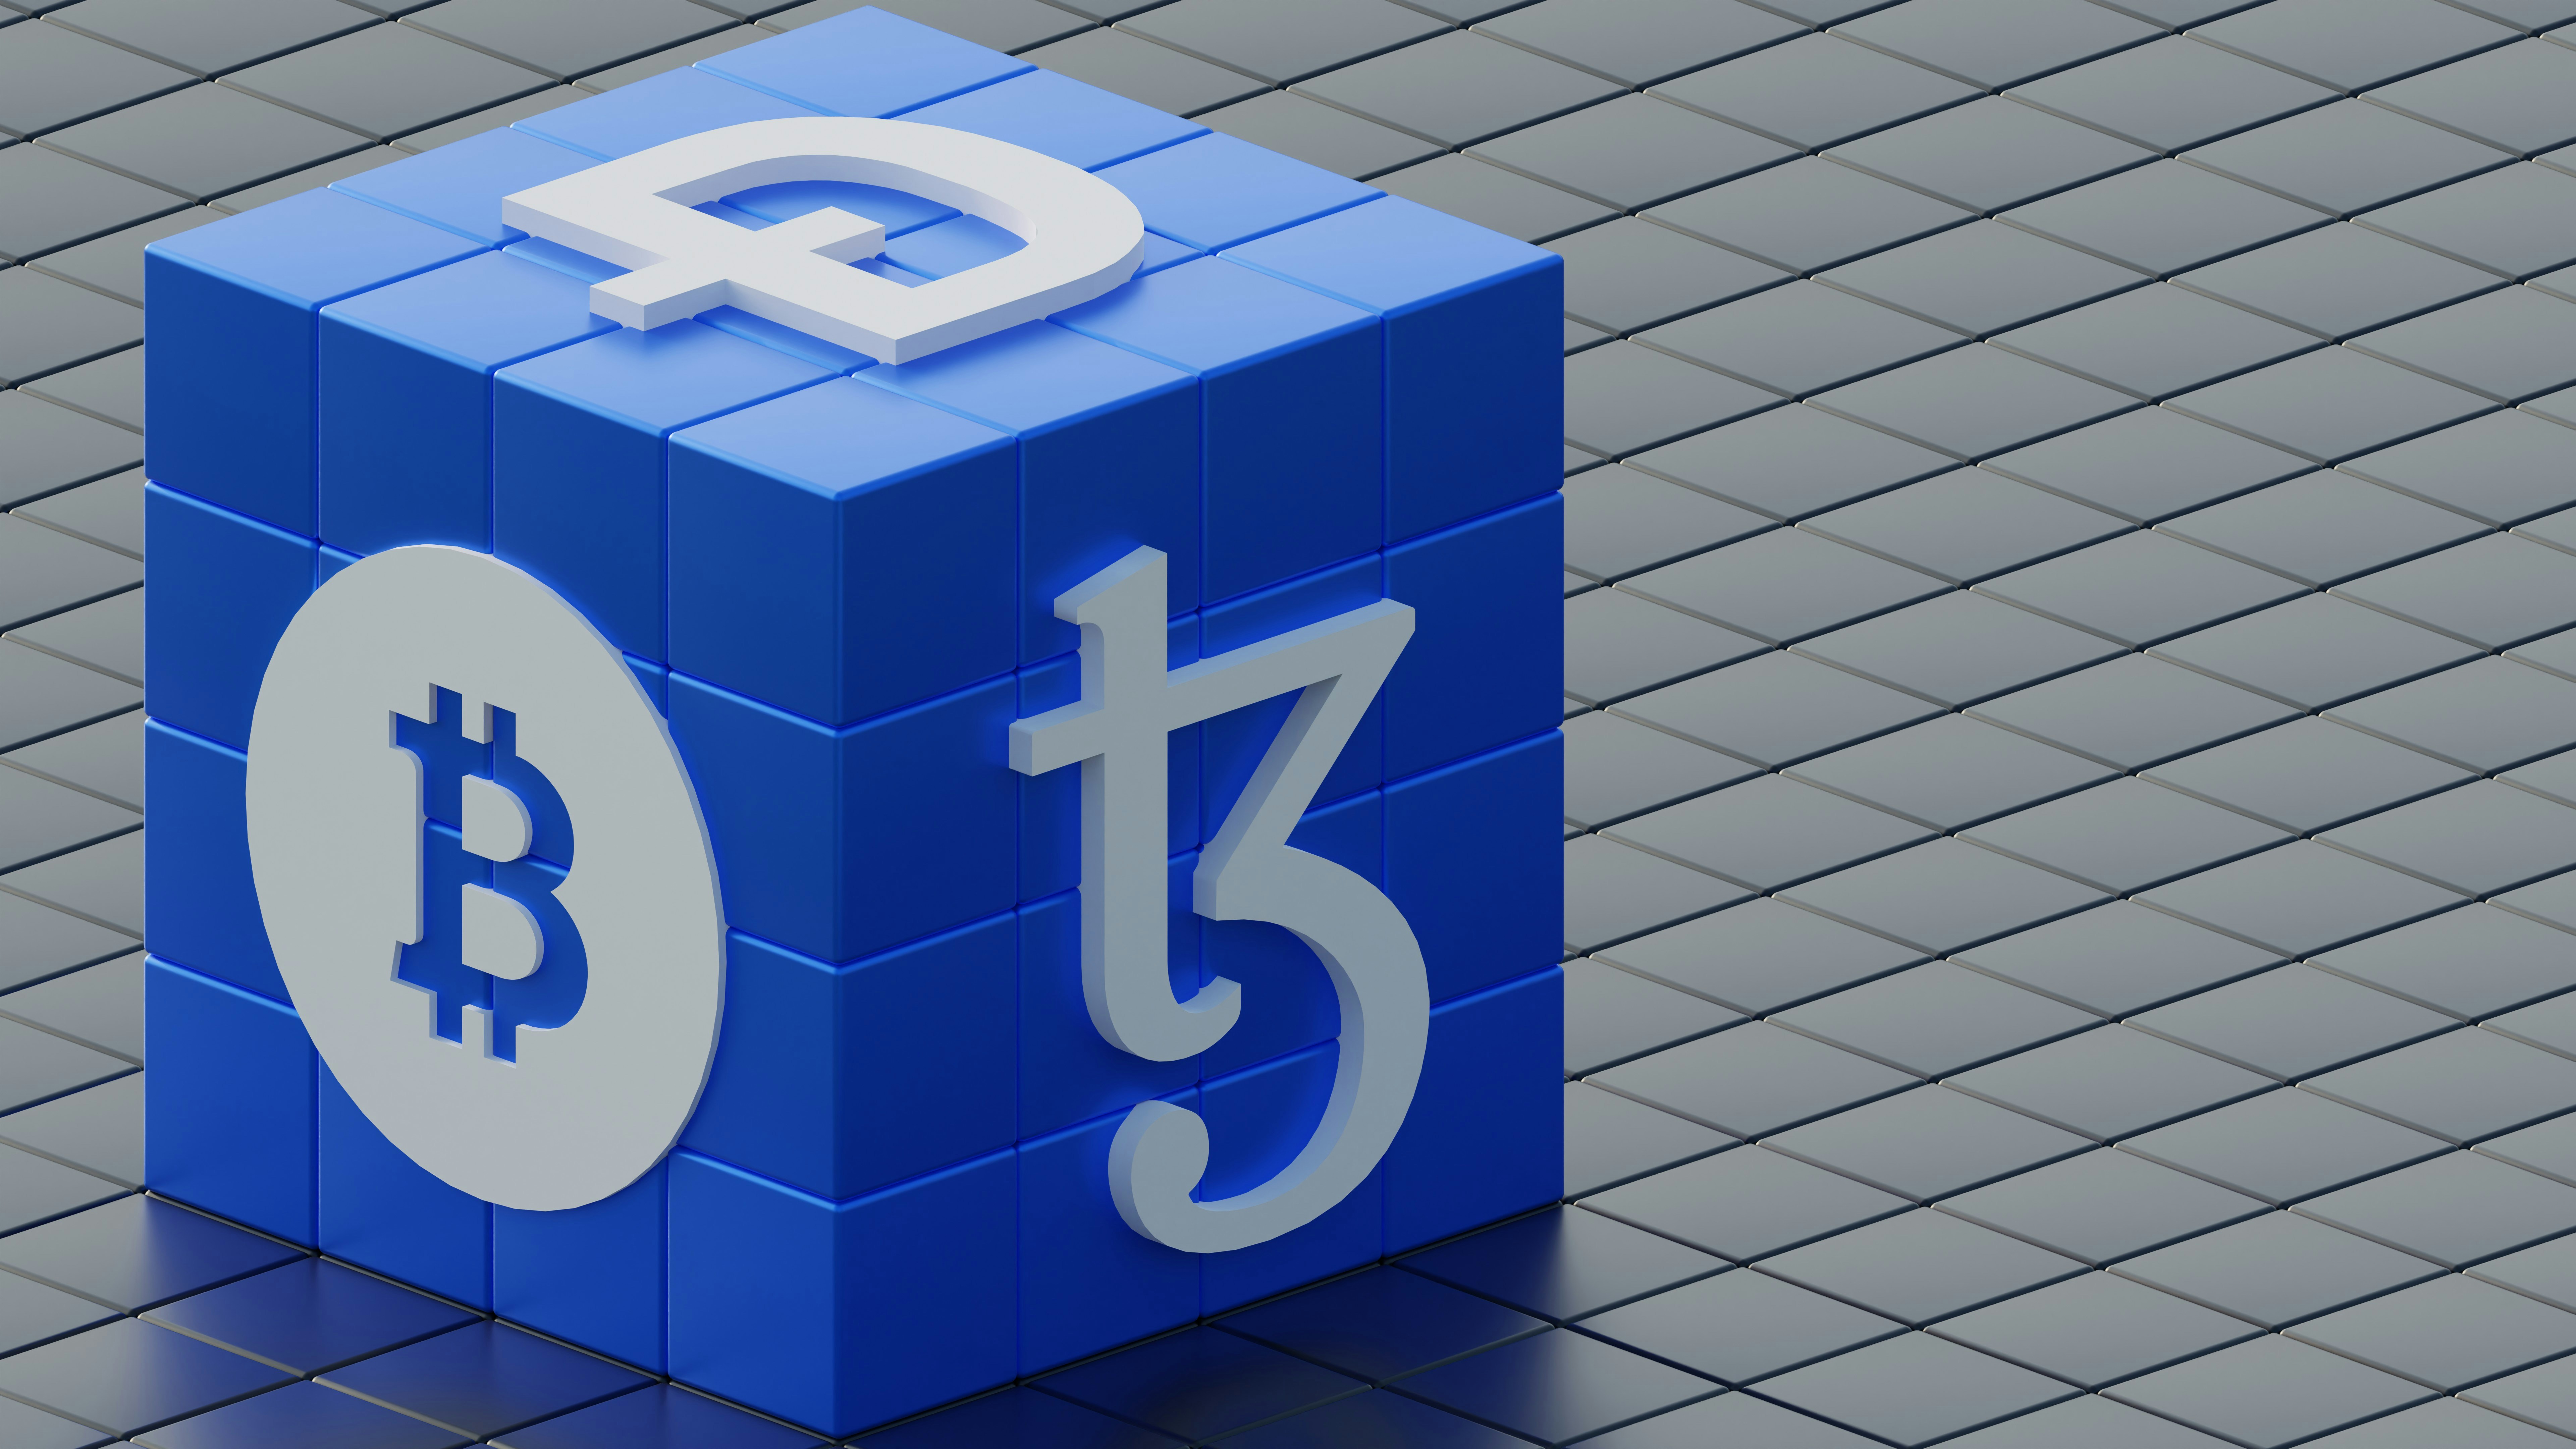 3D illustration of Tezos coin, bitcoin, Ehtereum, and dogecoin wrapped around blue blocks. Tezos is a blockchain designed to evolve. work : Email: shubhamdhage000@gmail.com